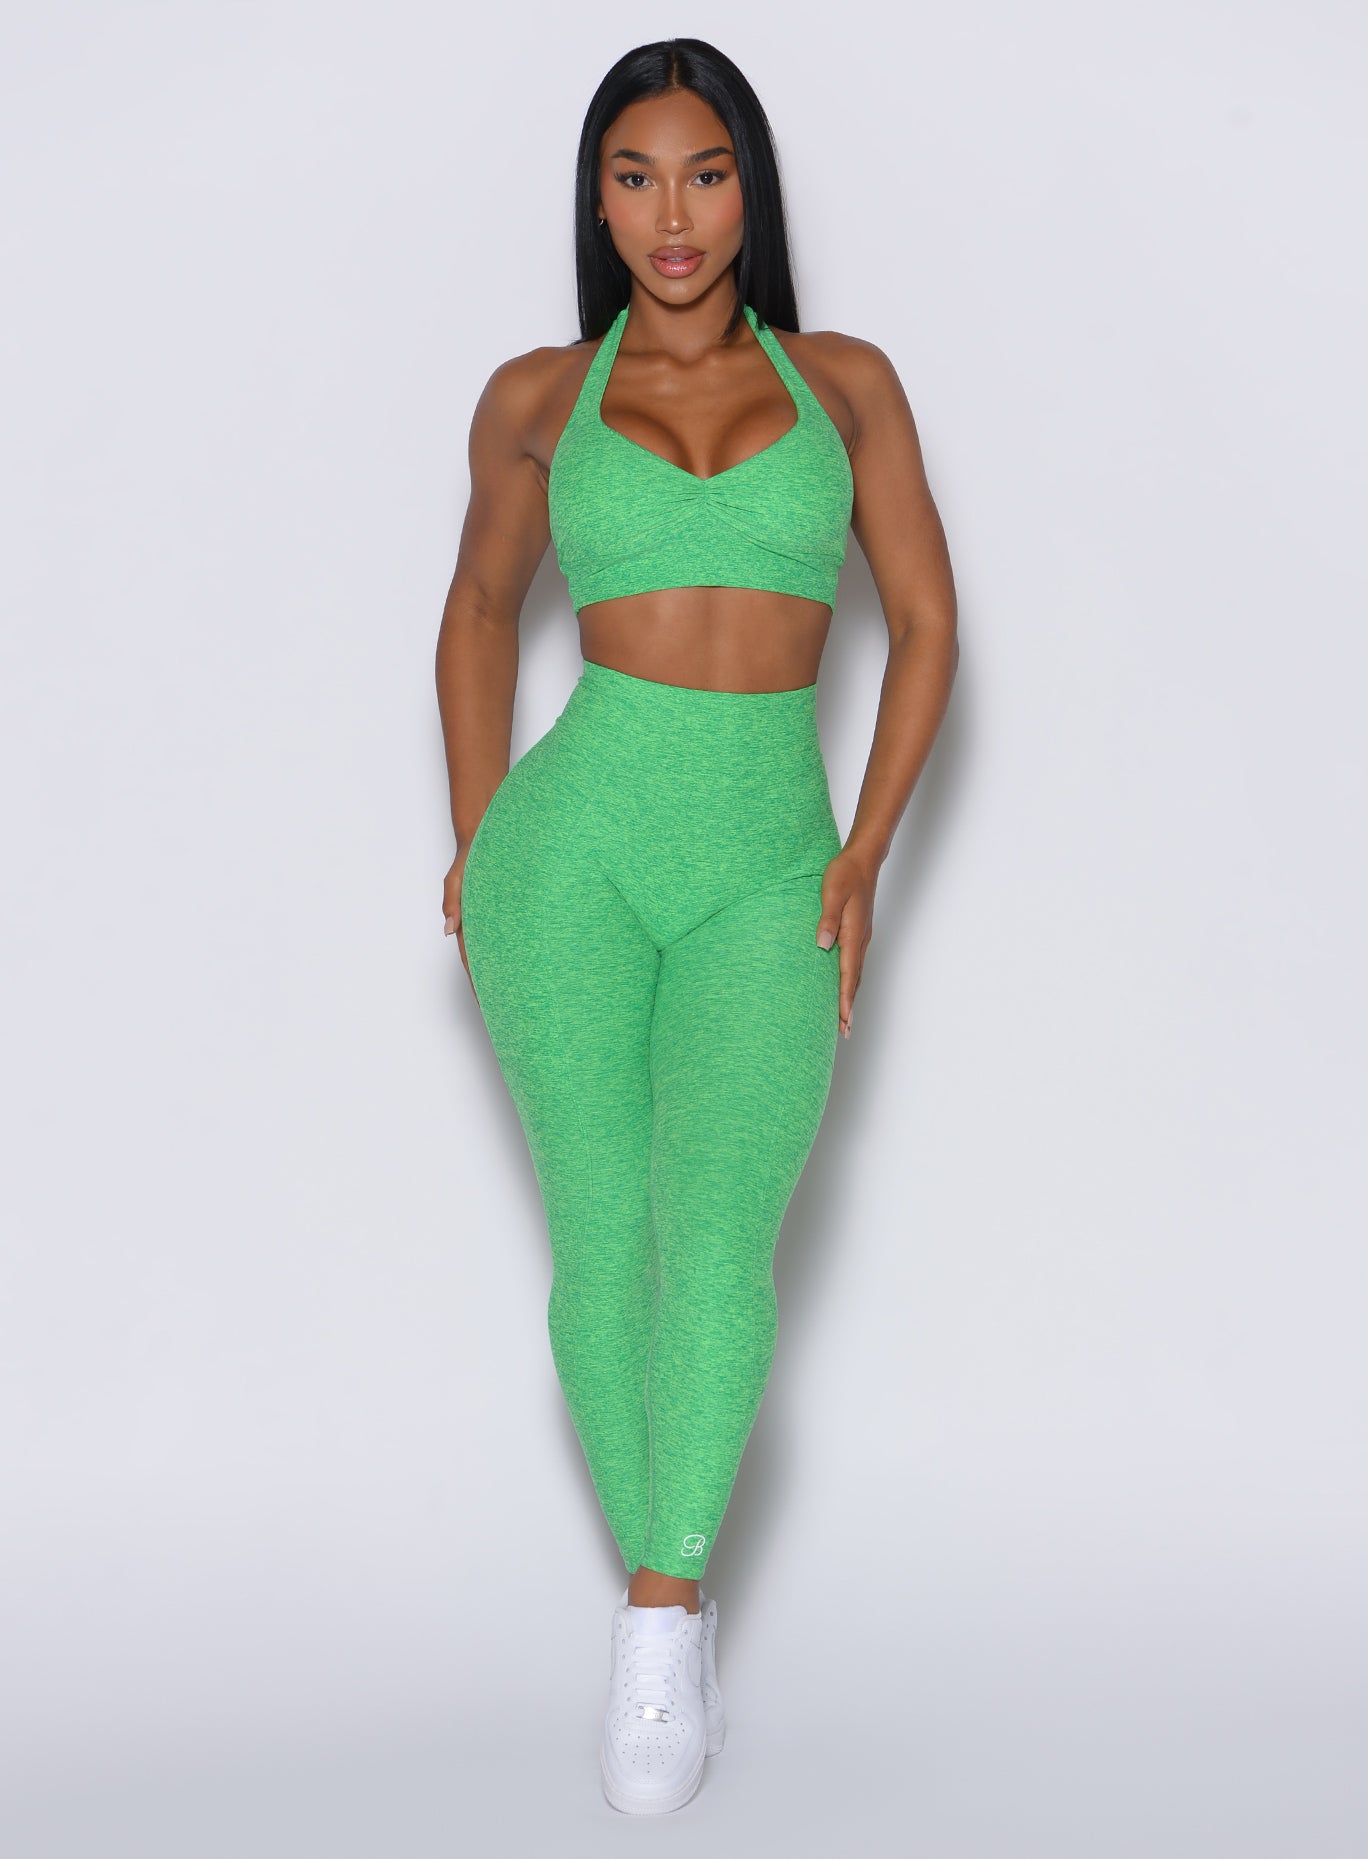 front profile view of a model wearing our V back leggings in Neon Miami Beach color along with a matching bra